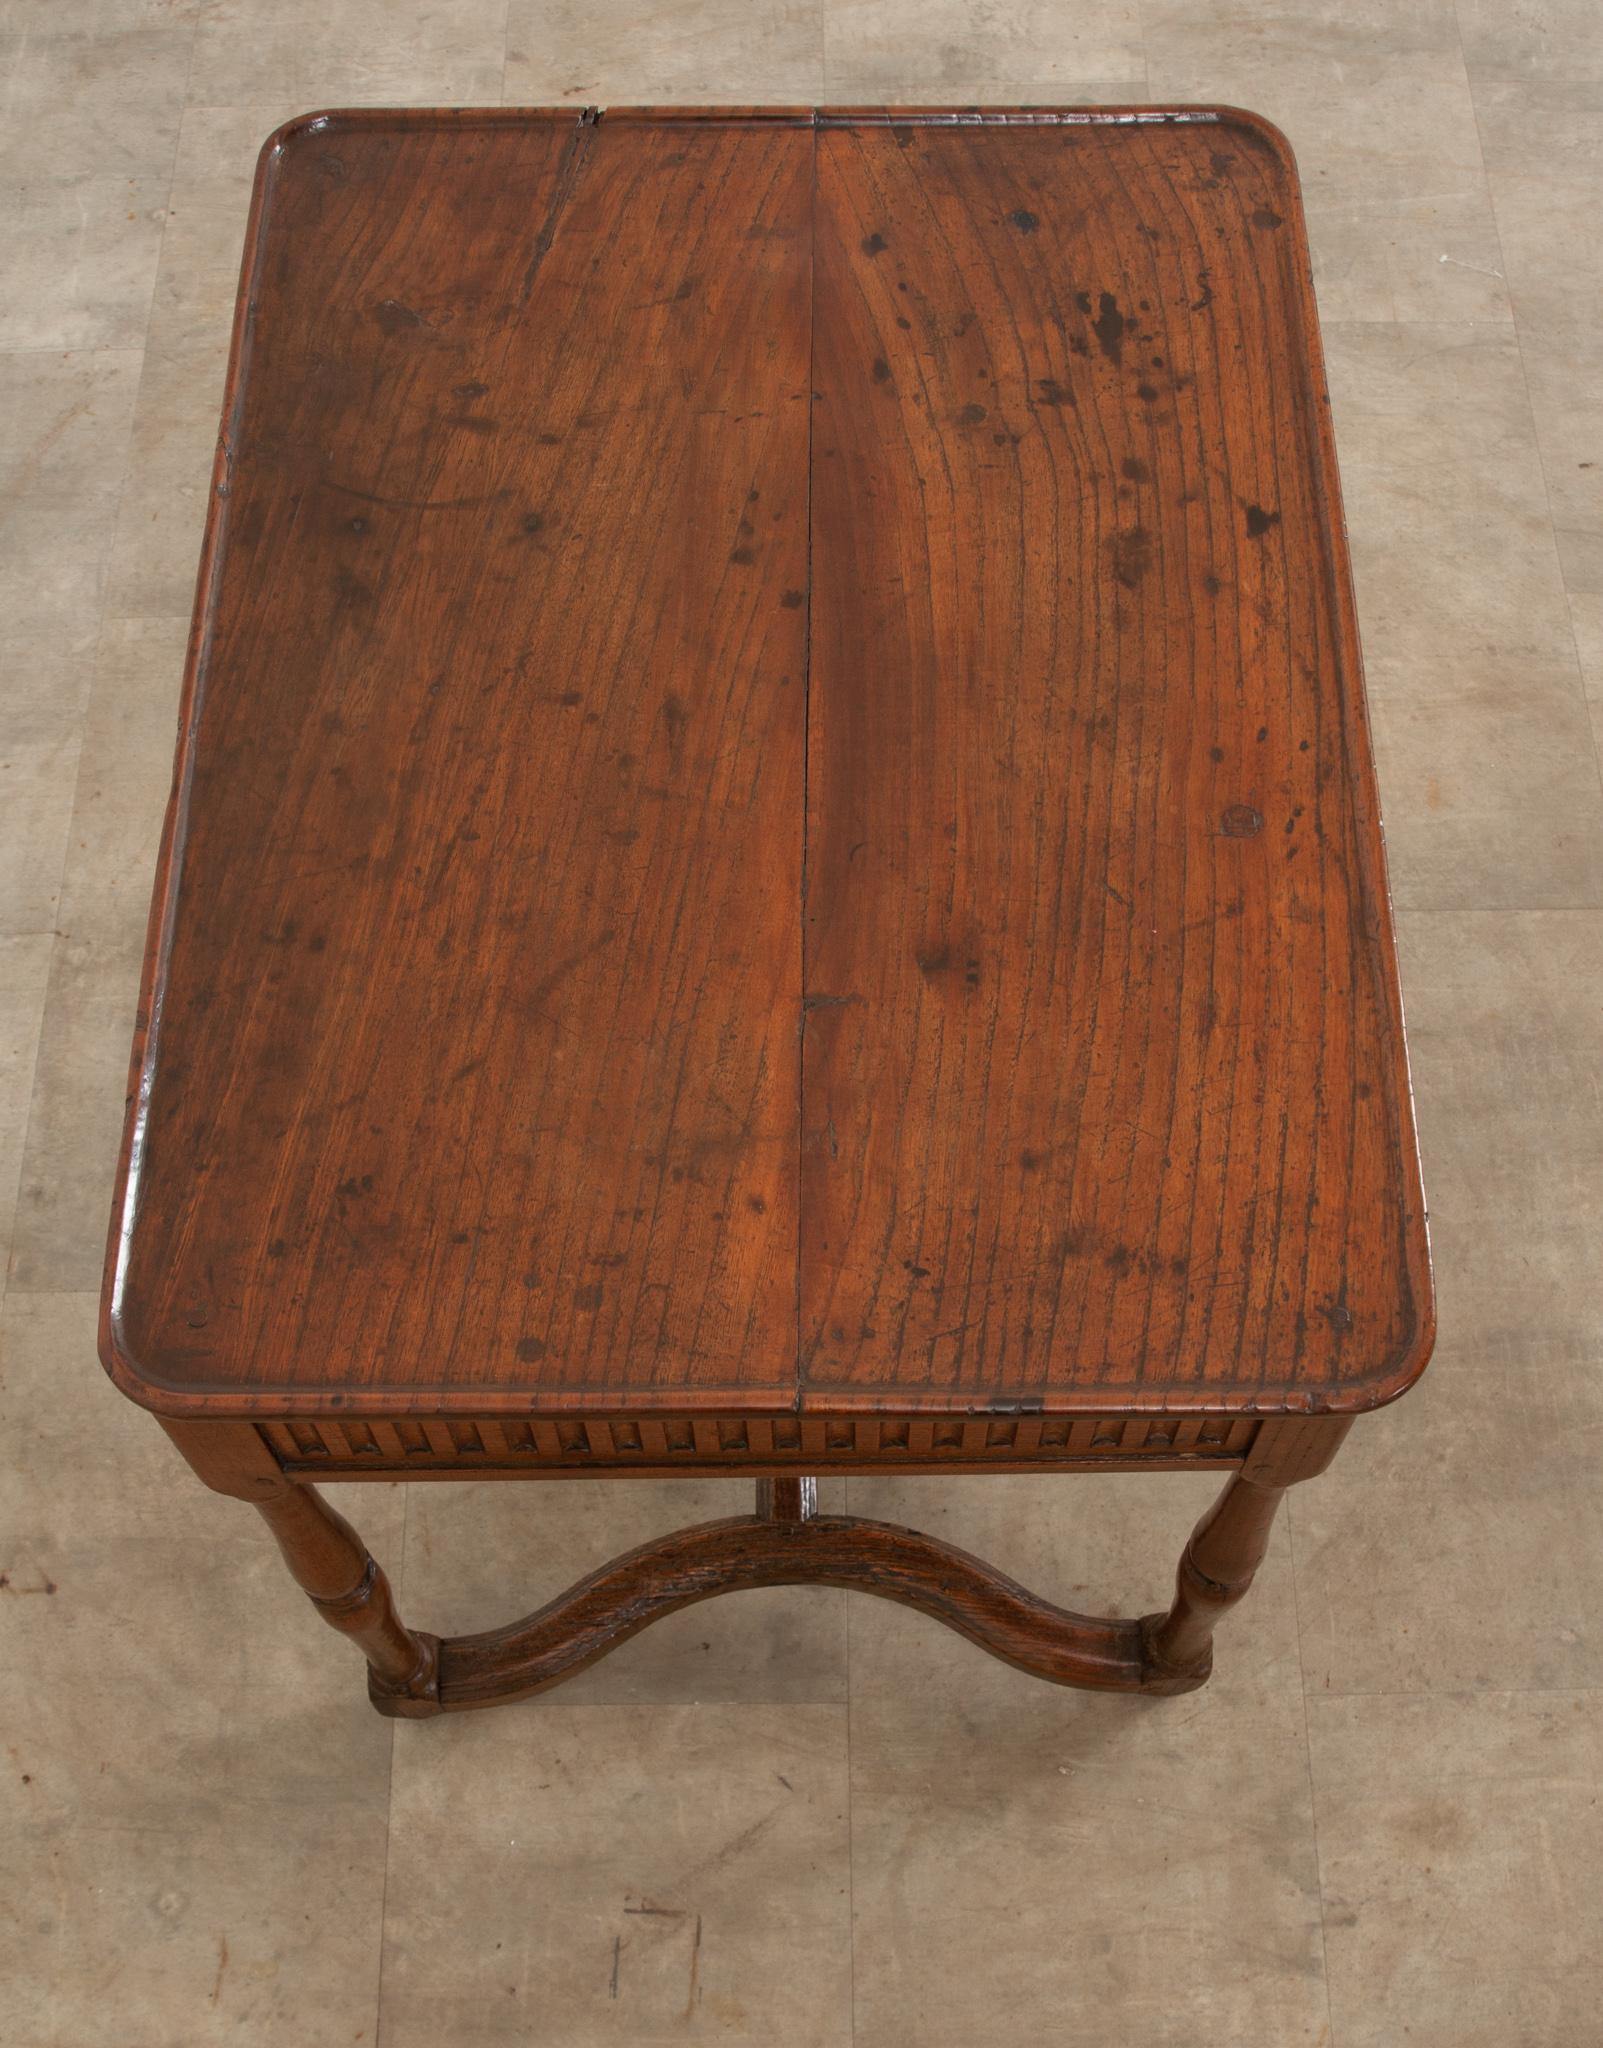 French Elm Side Table From Brittany In Good Condition For Sale In Baton Rouge, LA